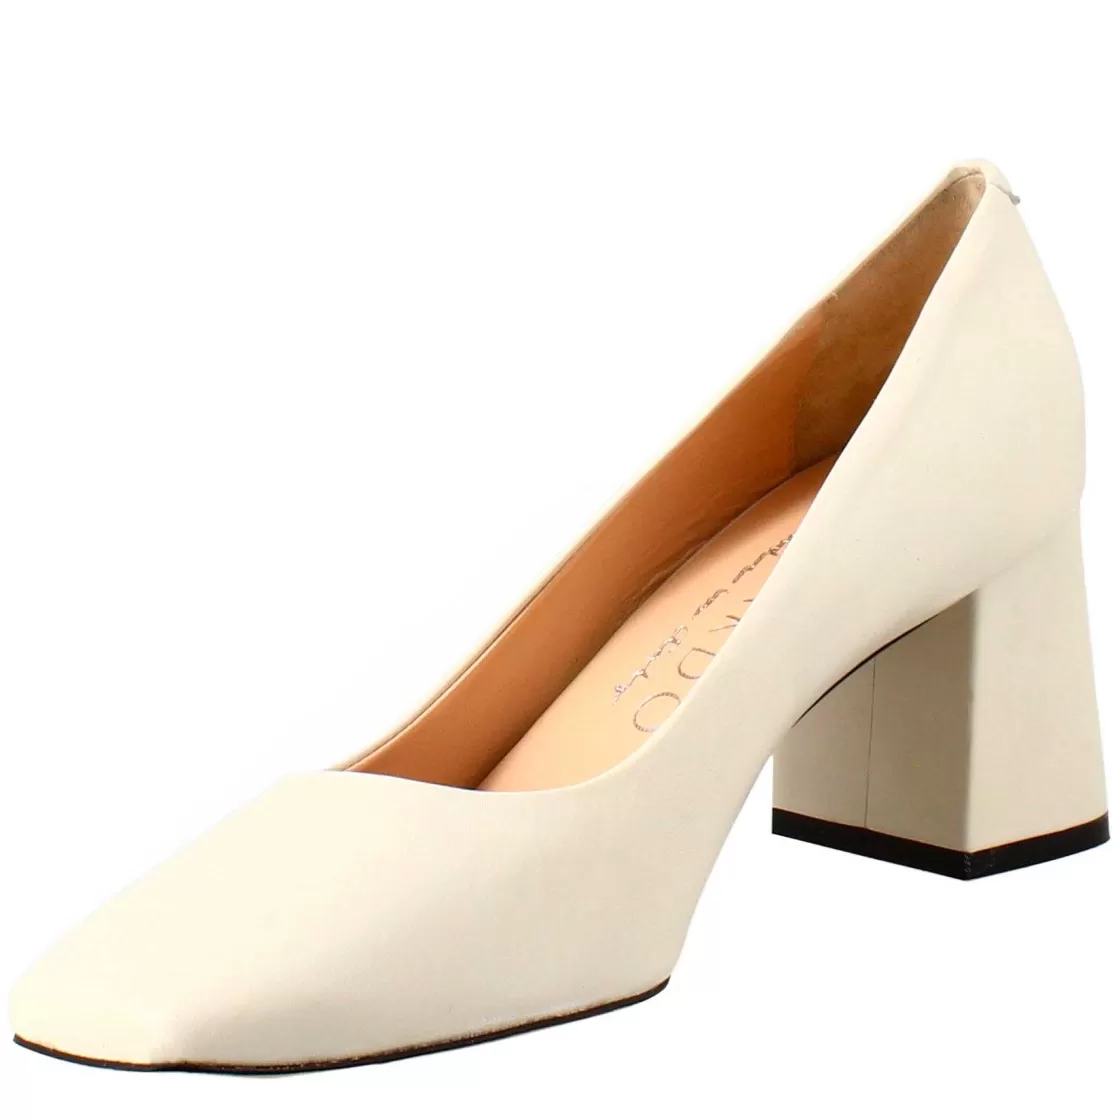 Leonardo Women'S Slingback Pumps In Beige Leather With Pointed Toe New